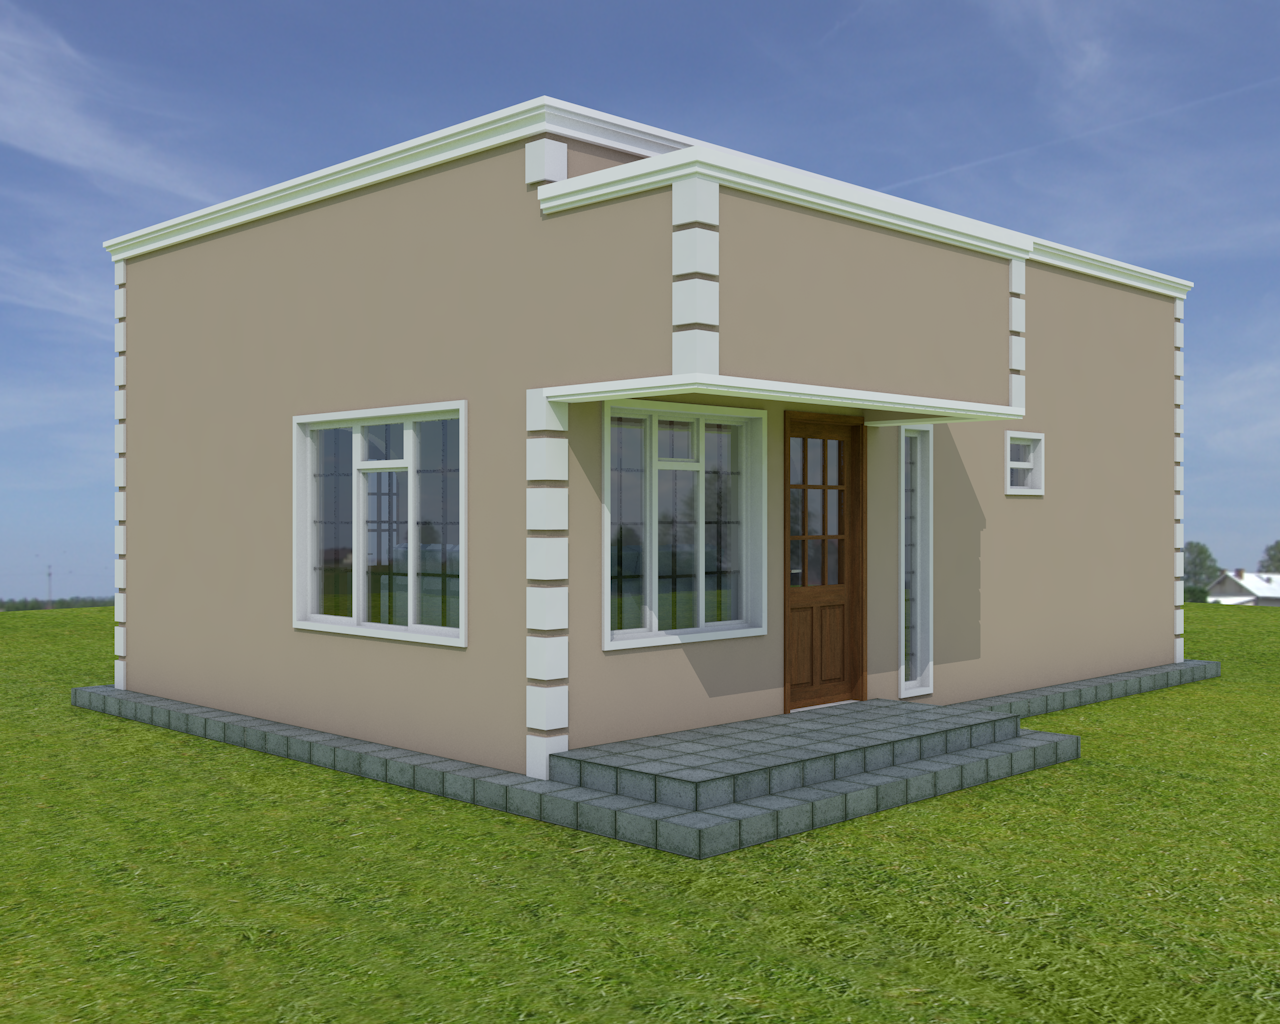 A Simple Two Bedroom House Plan